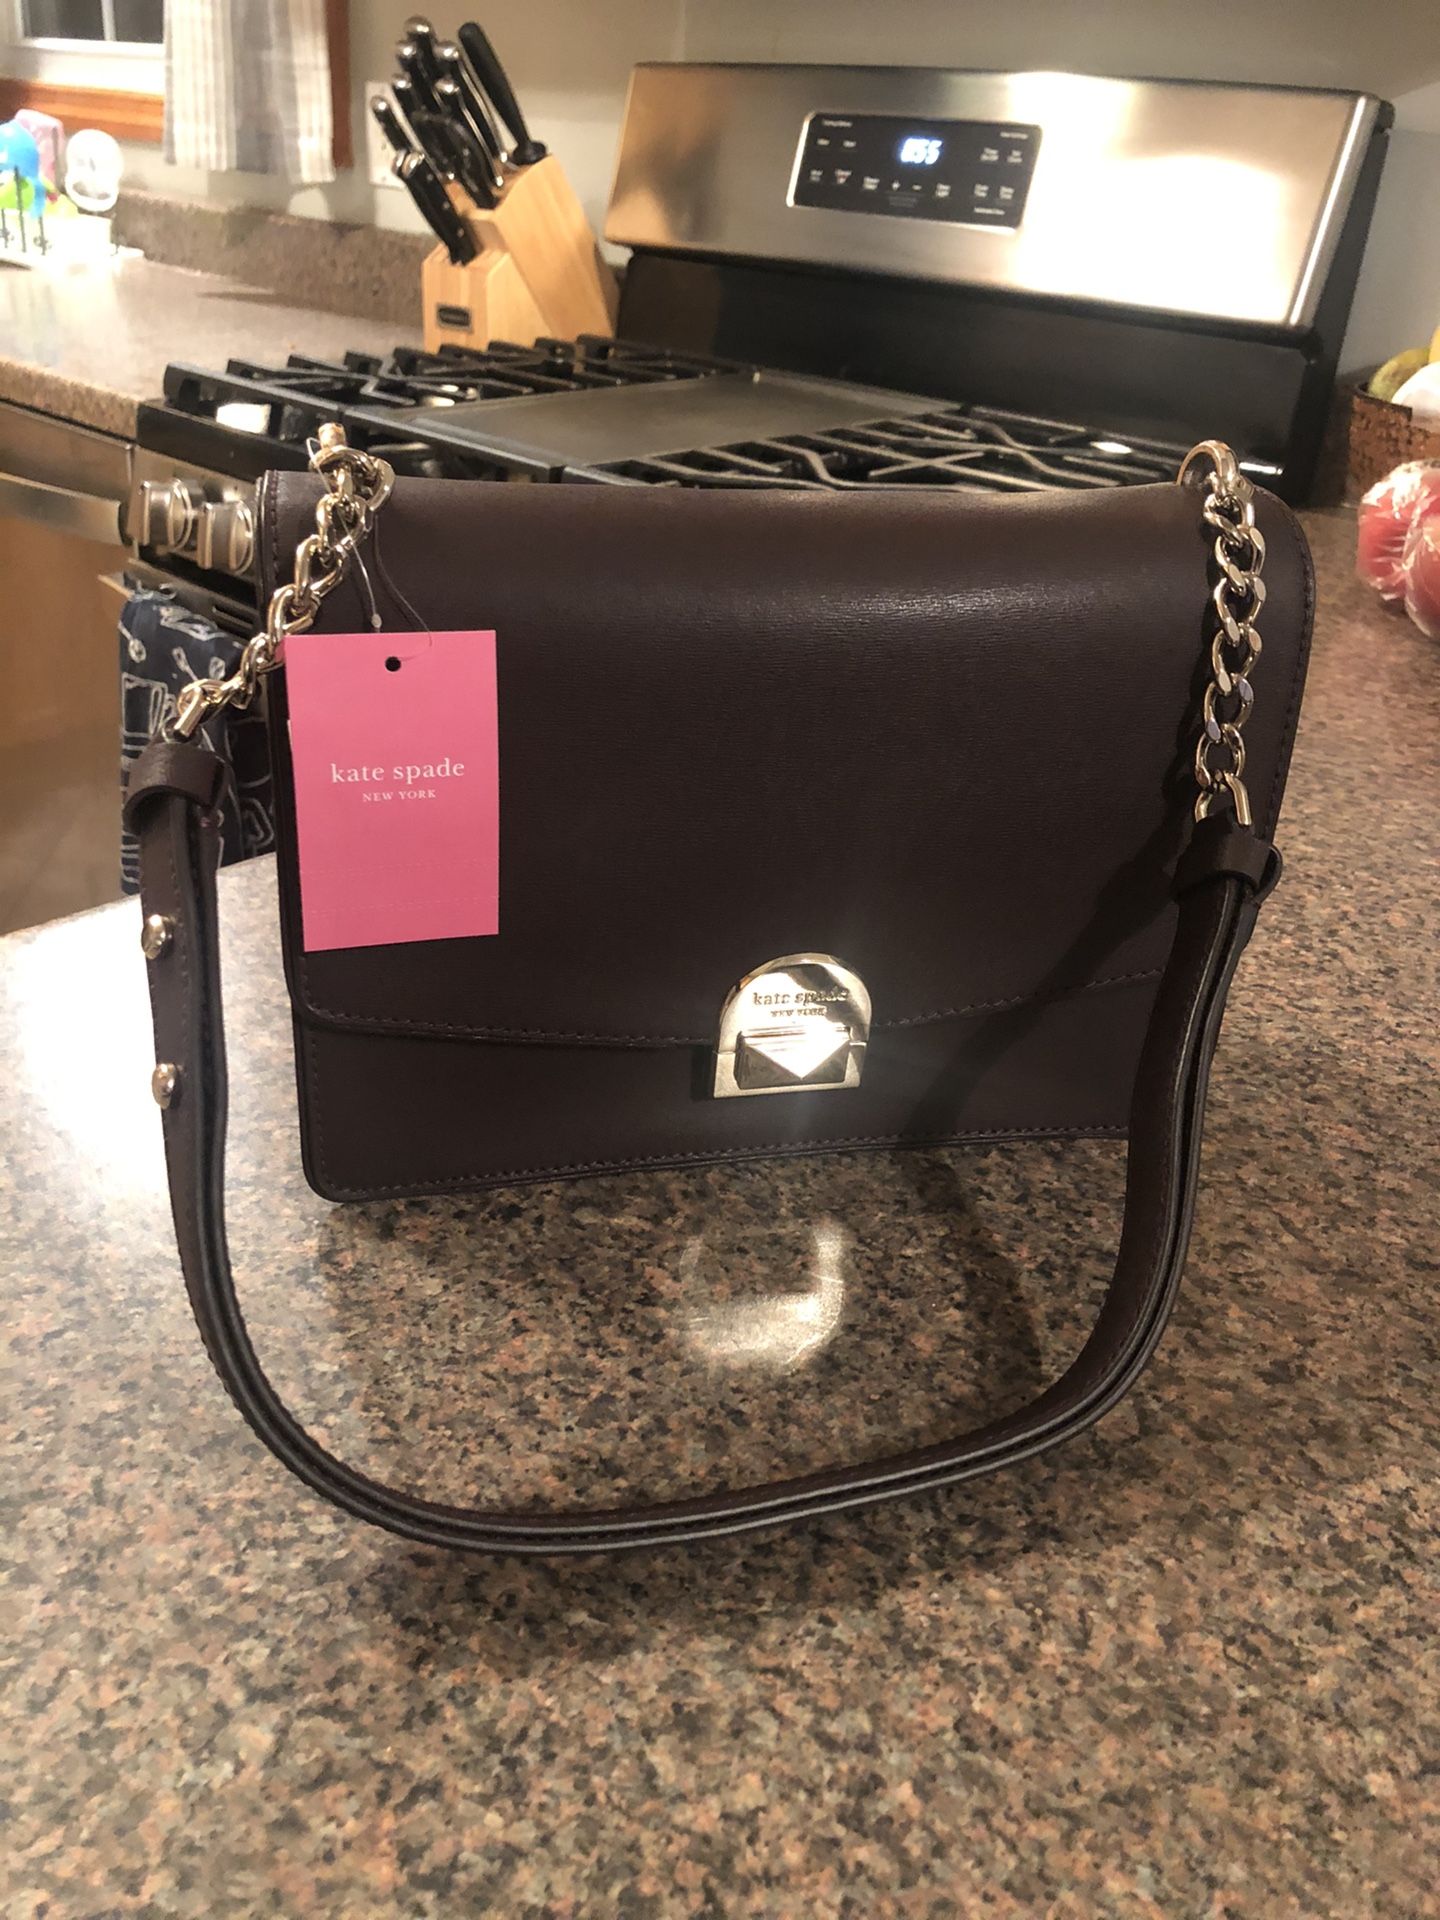 Kate Spade shoulder bag brand new with tags